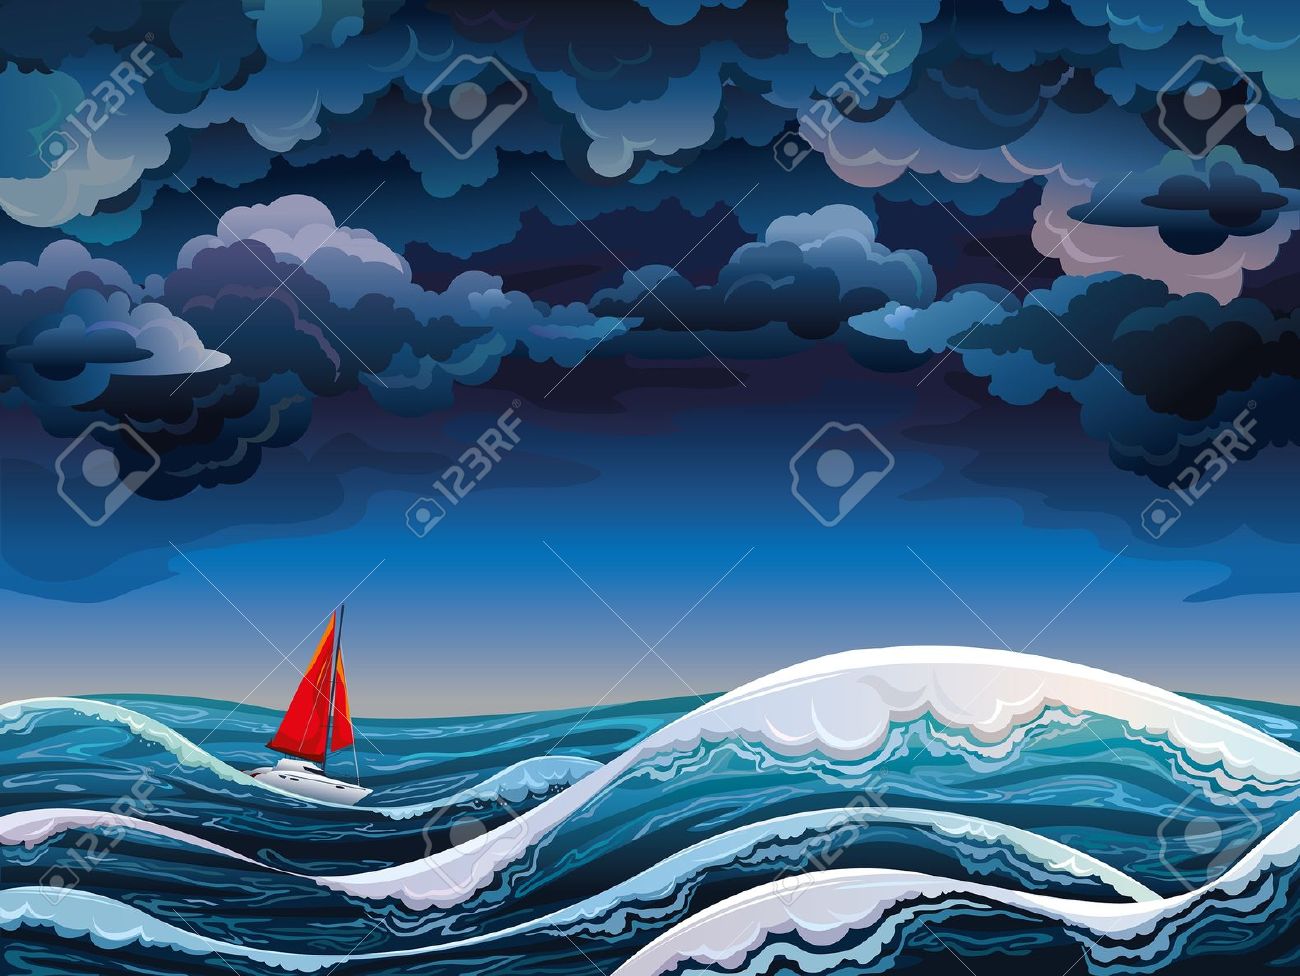 774 Stormy Sea Cliparts, Stock Vector And Royalty Free Stormy Sea.